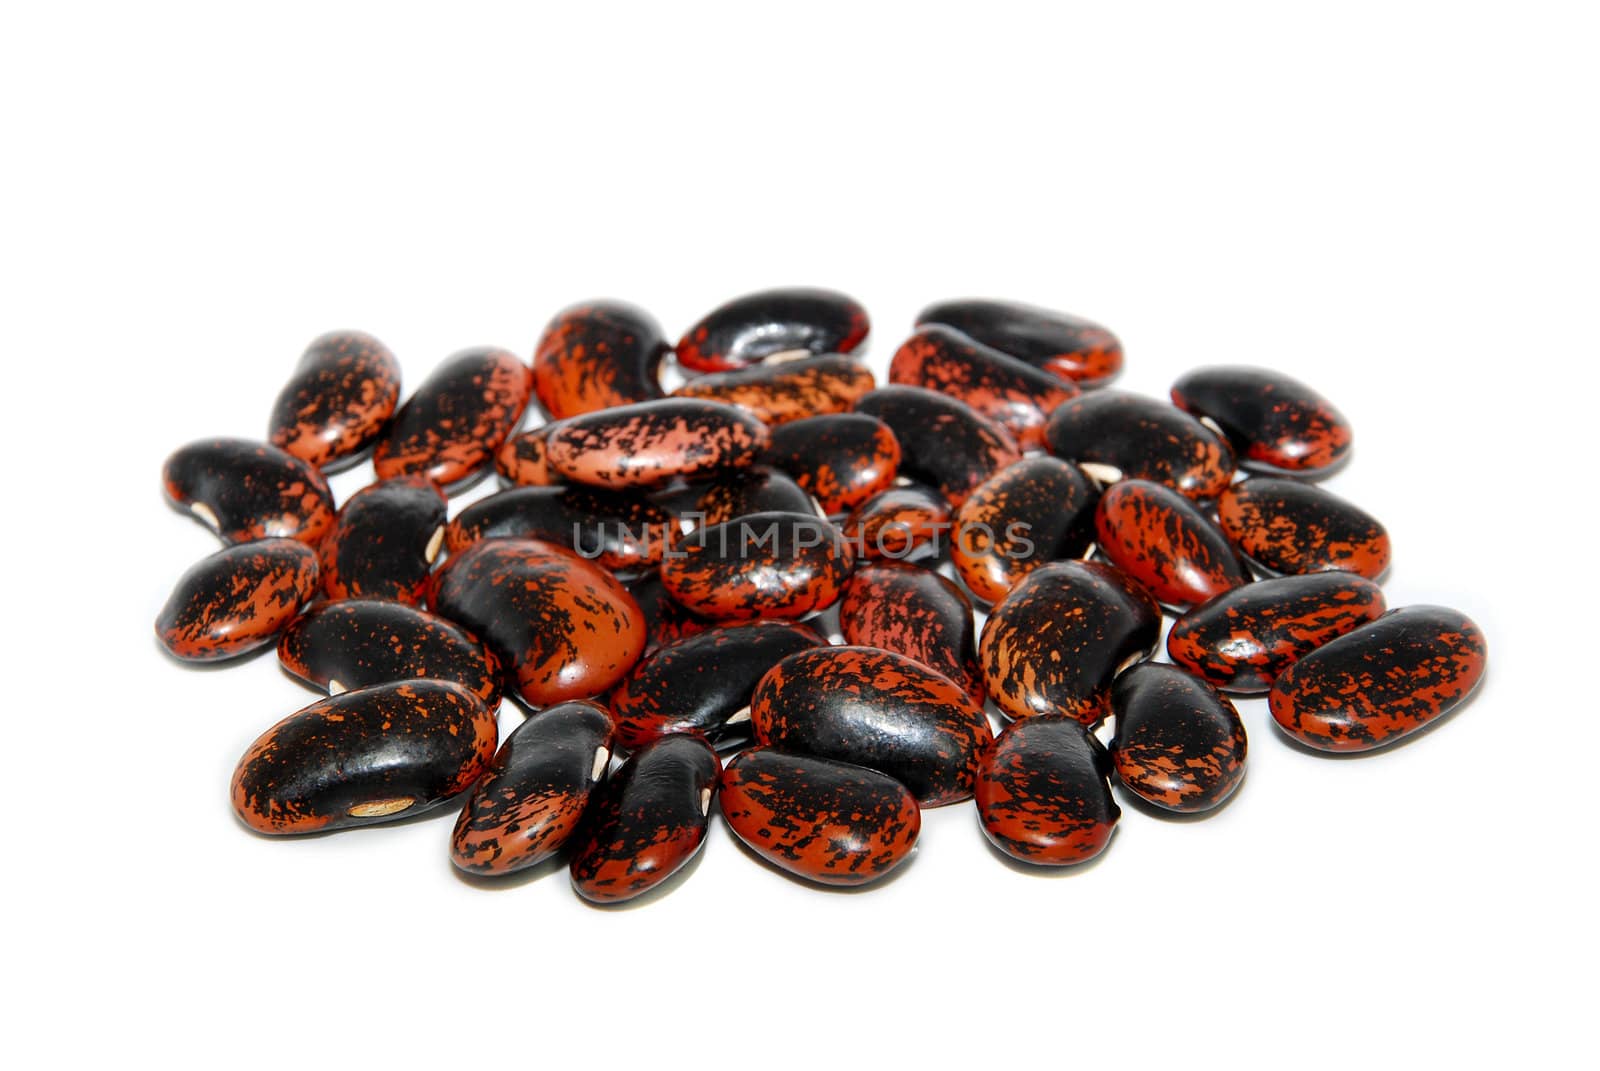 Pile of runner bean seeds, isolated on a white background